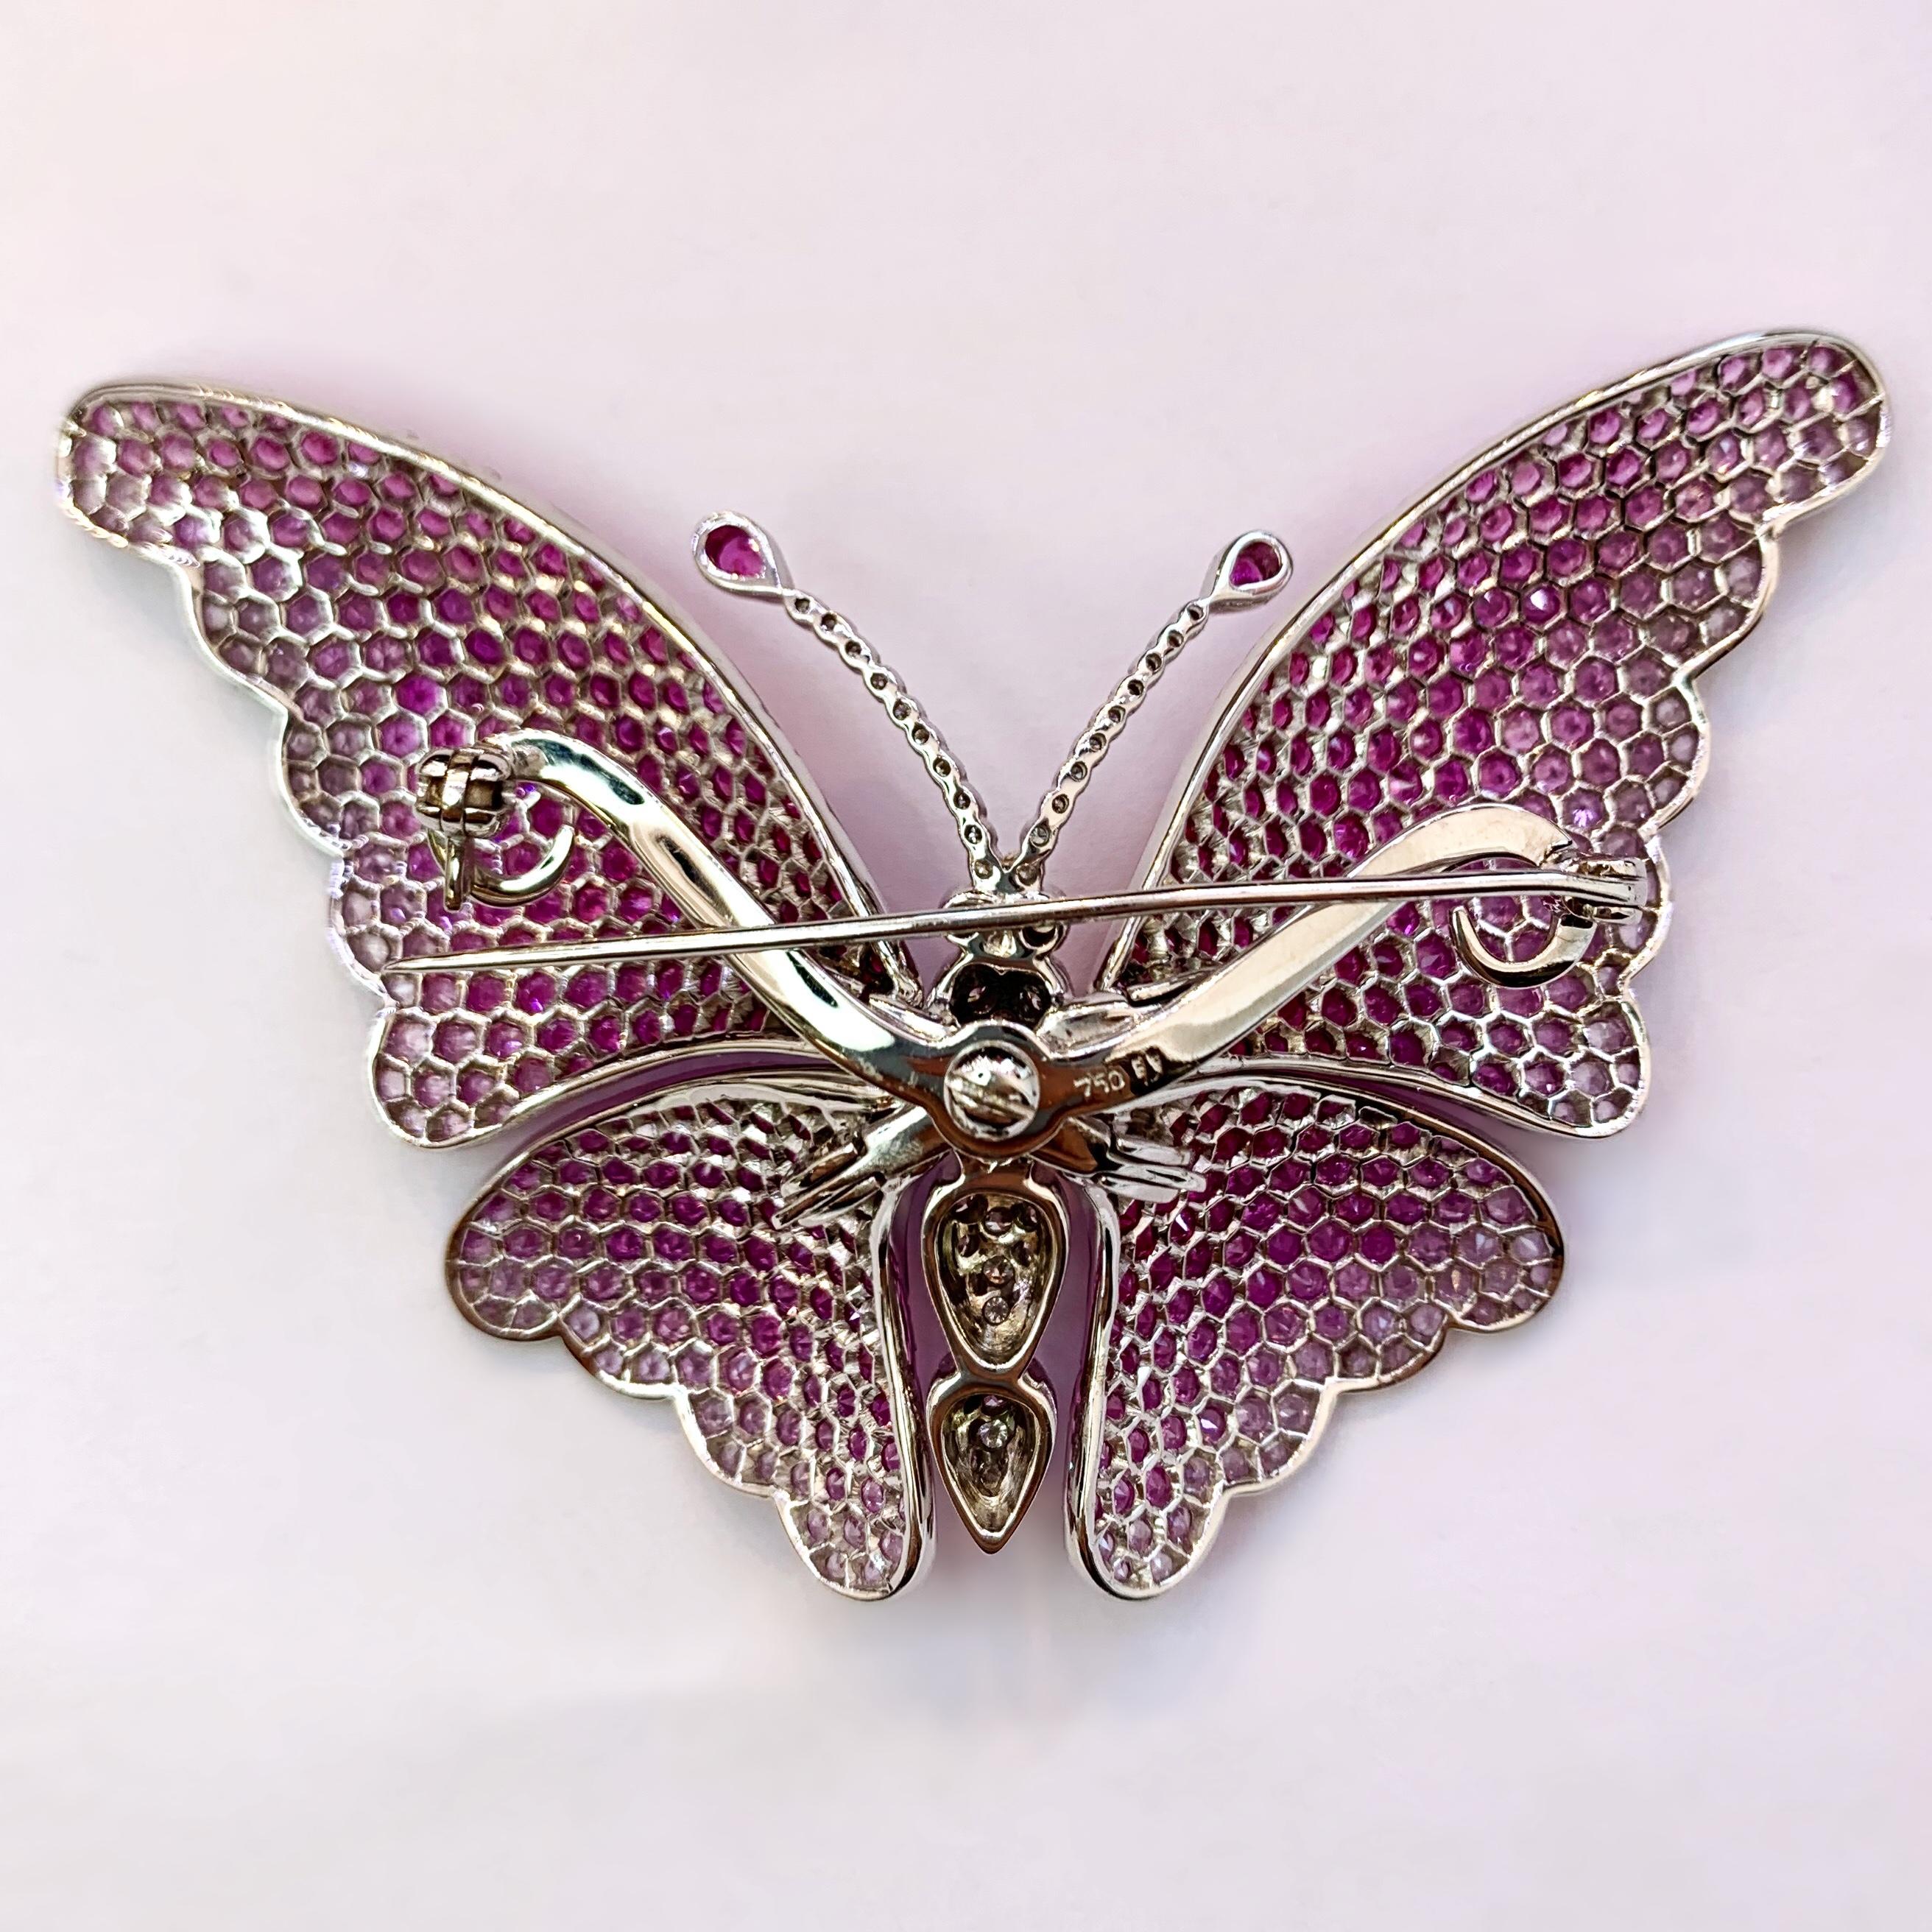 Butterflies aren't free but this is fabulous! This 18K white gold beauty is set with 554 round sapphires that have a color range of faint pink to hot pink with a total weight of approximately 13.85cts. The antennae are 2 pink pear shaped sapphires